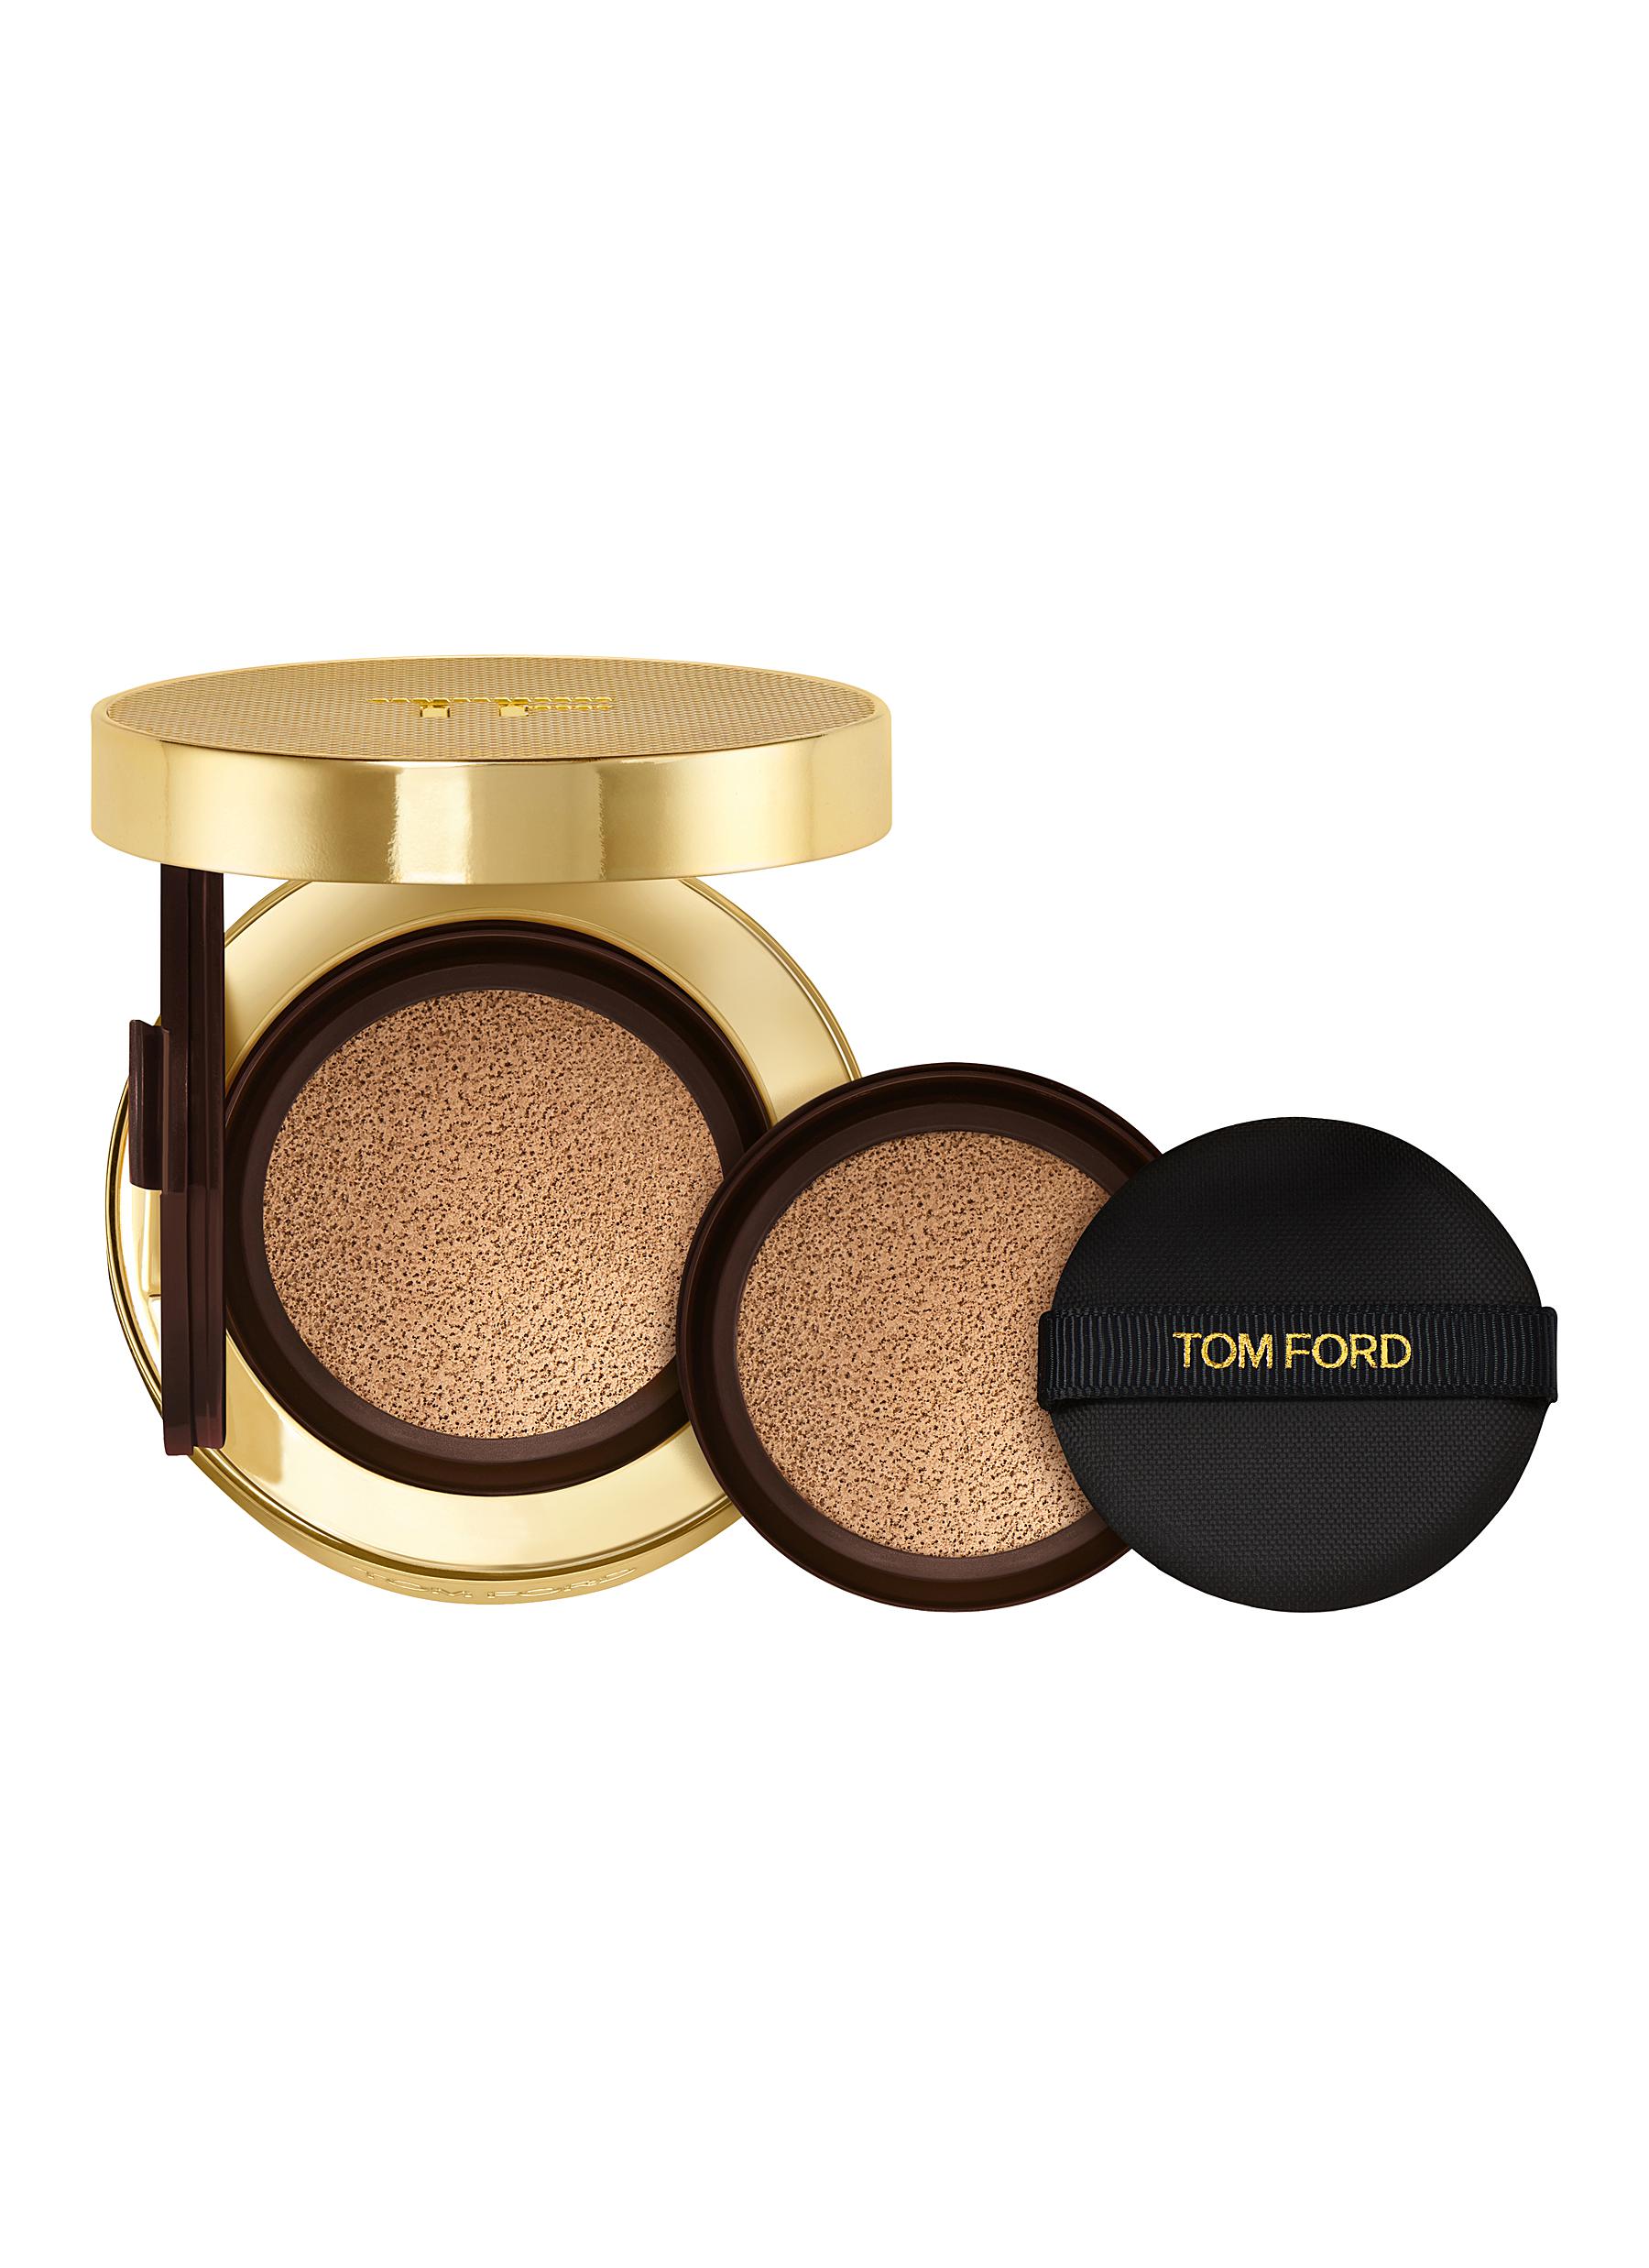 TOM FORD BEAUTY | SHADE AND ILLUMINATE FOUNDATION SOFT RADIANCE CUSHION  COMPACT SPF 45/PA+++ –  BISQUE  BISQUE | Beauty | Lane Crawford